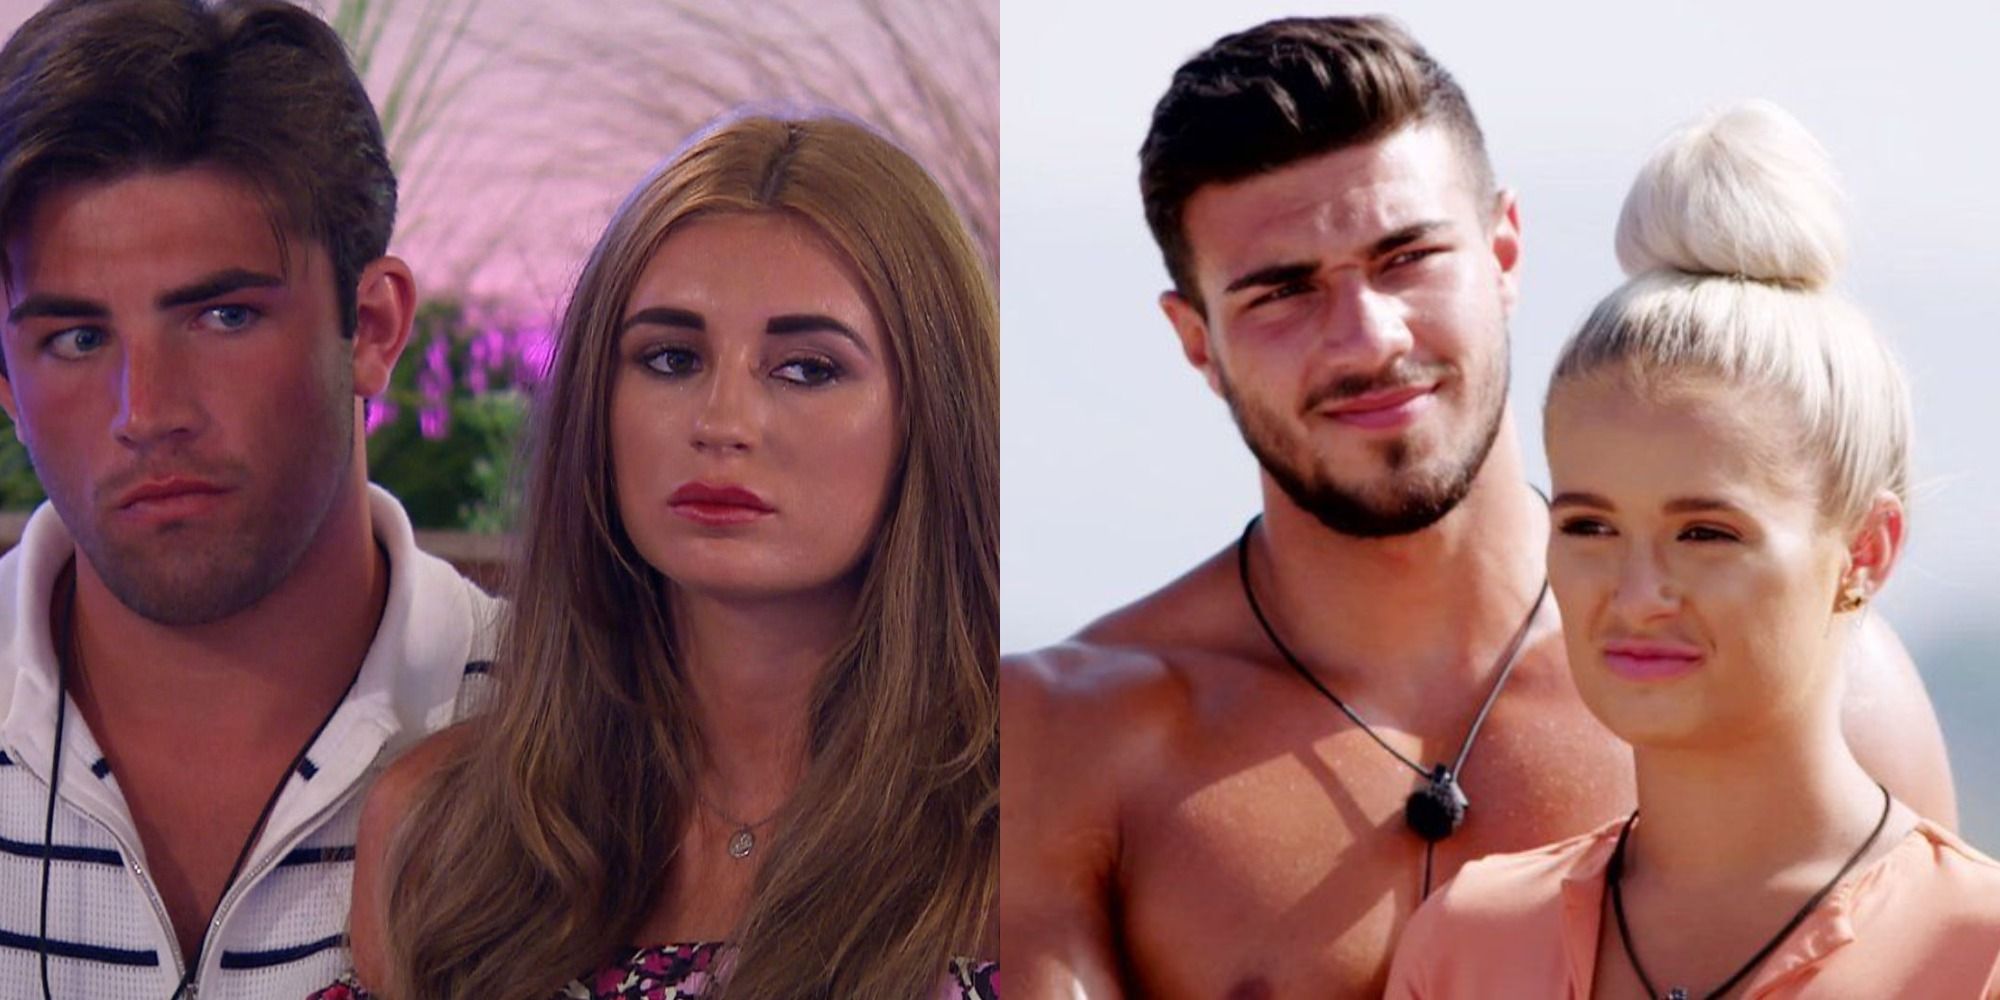 Love Island UK: 10 Best Couples And Their Most Iconic Scenes